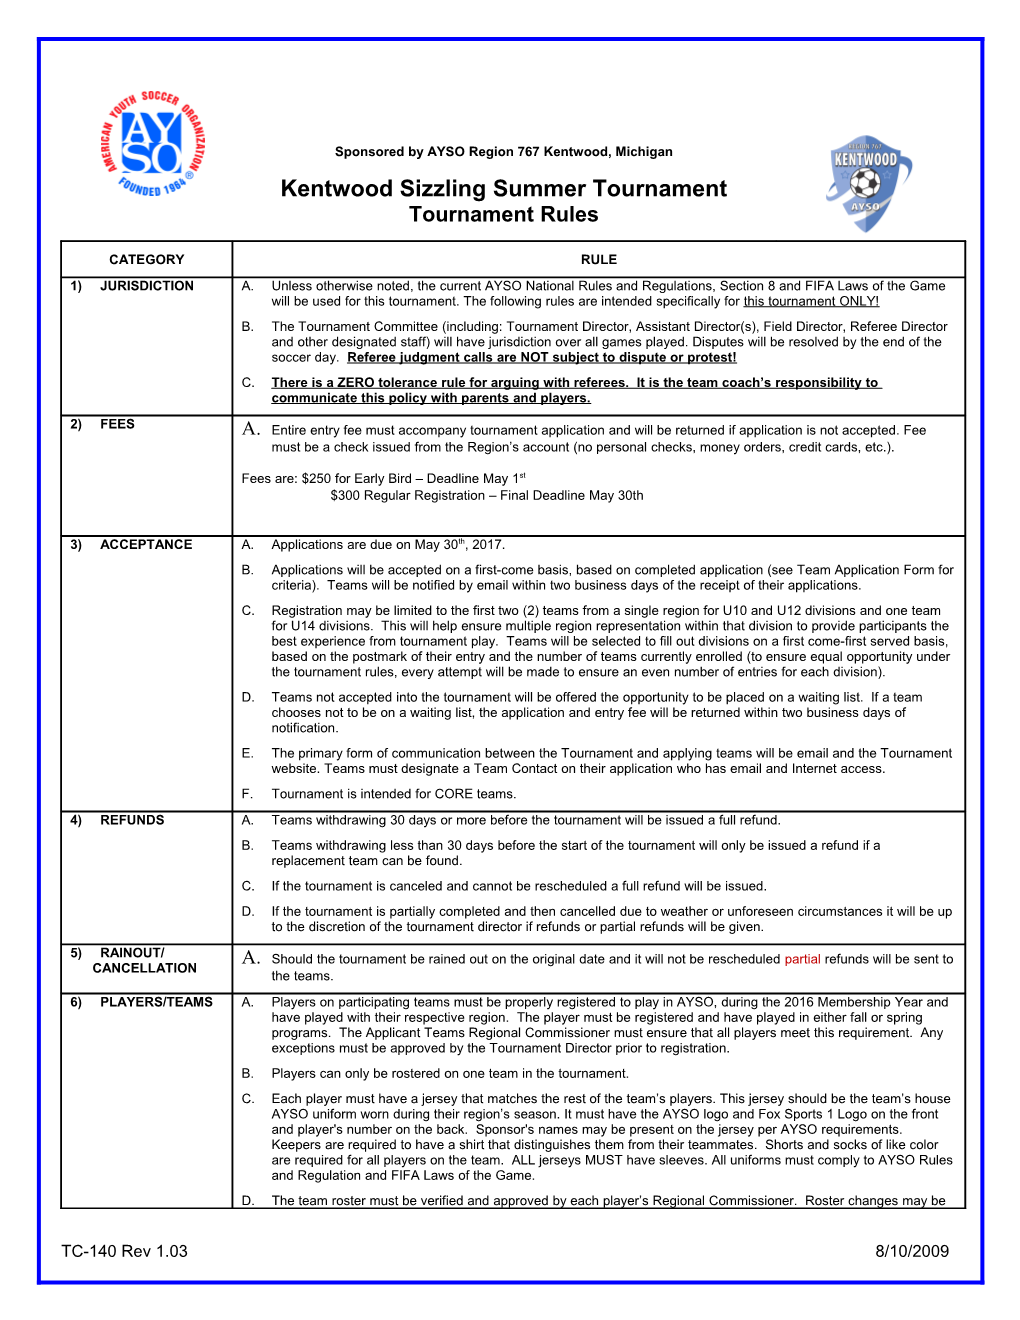 Kentwood AYSO Sizzling Summer Tournament Rules